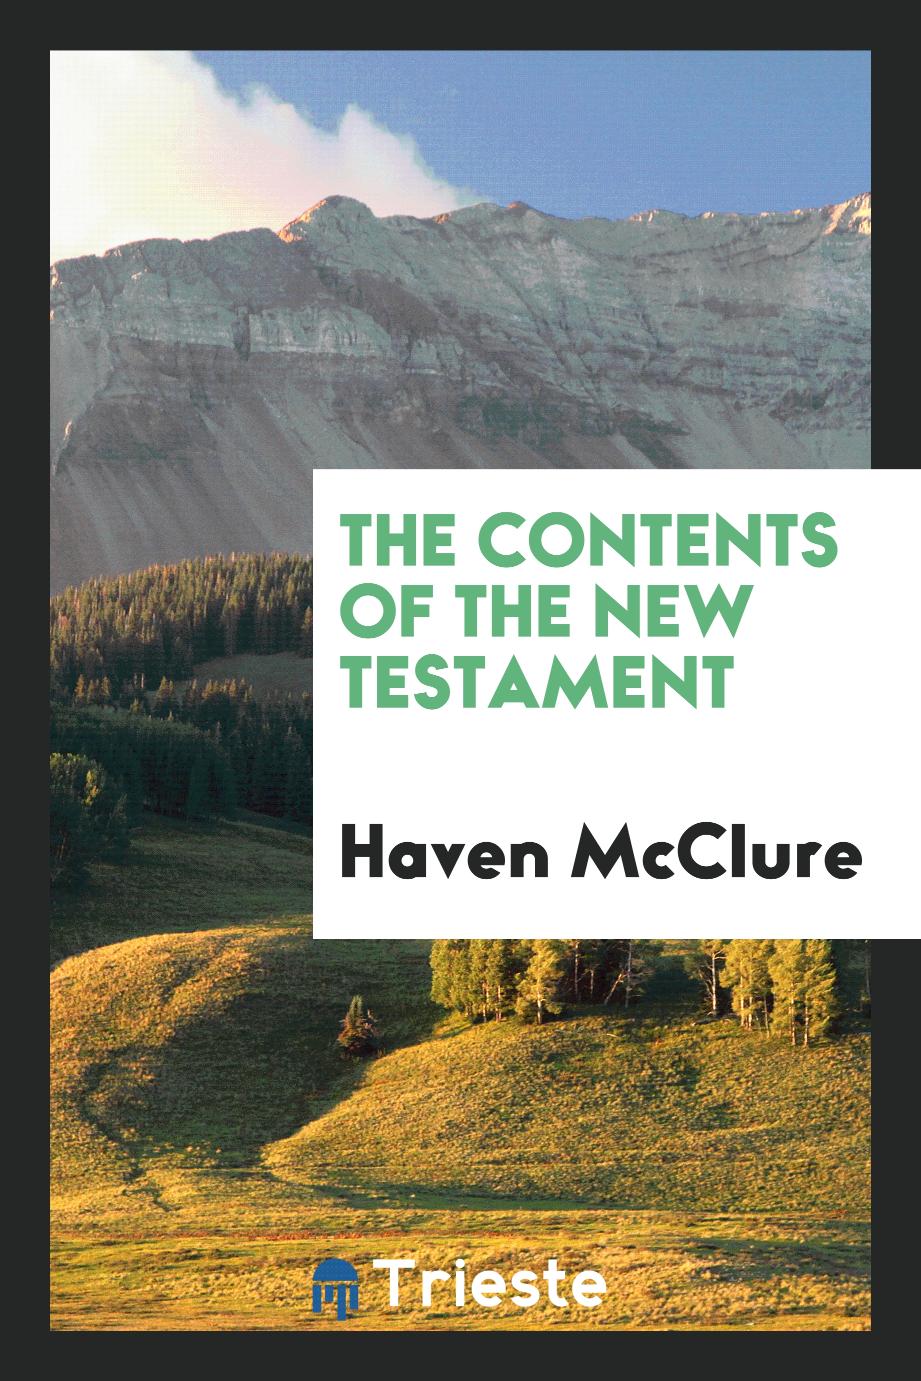 The contents of the New Testament